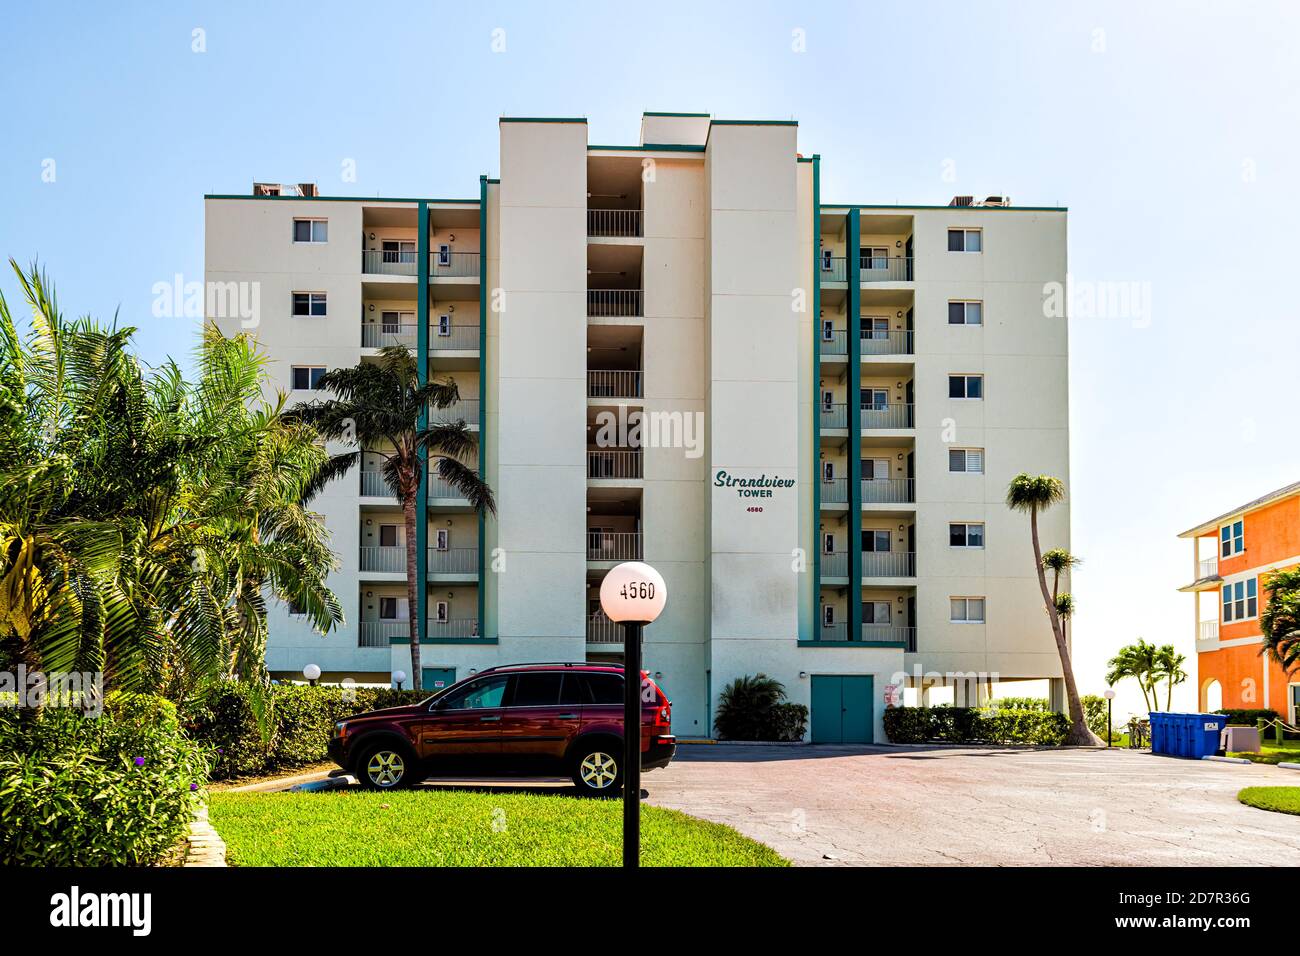 Fort Myers Beach, USA - April 29, 2018: Florida gulf coast with hotel condo apartment building sign called Strandview tower waterfront architecture an Stock Photo